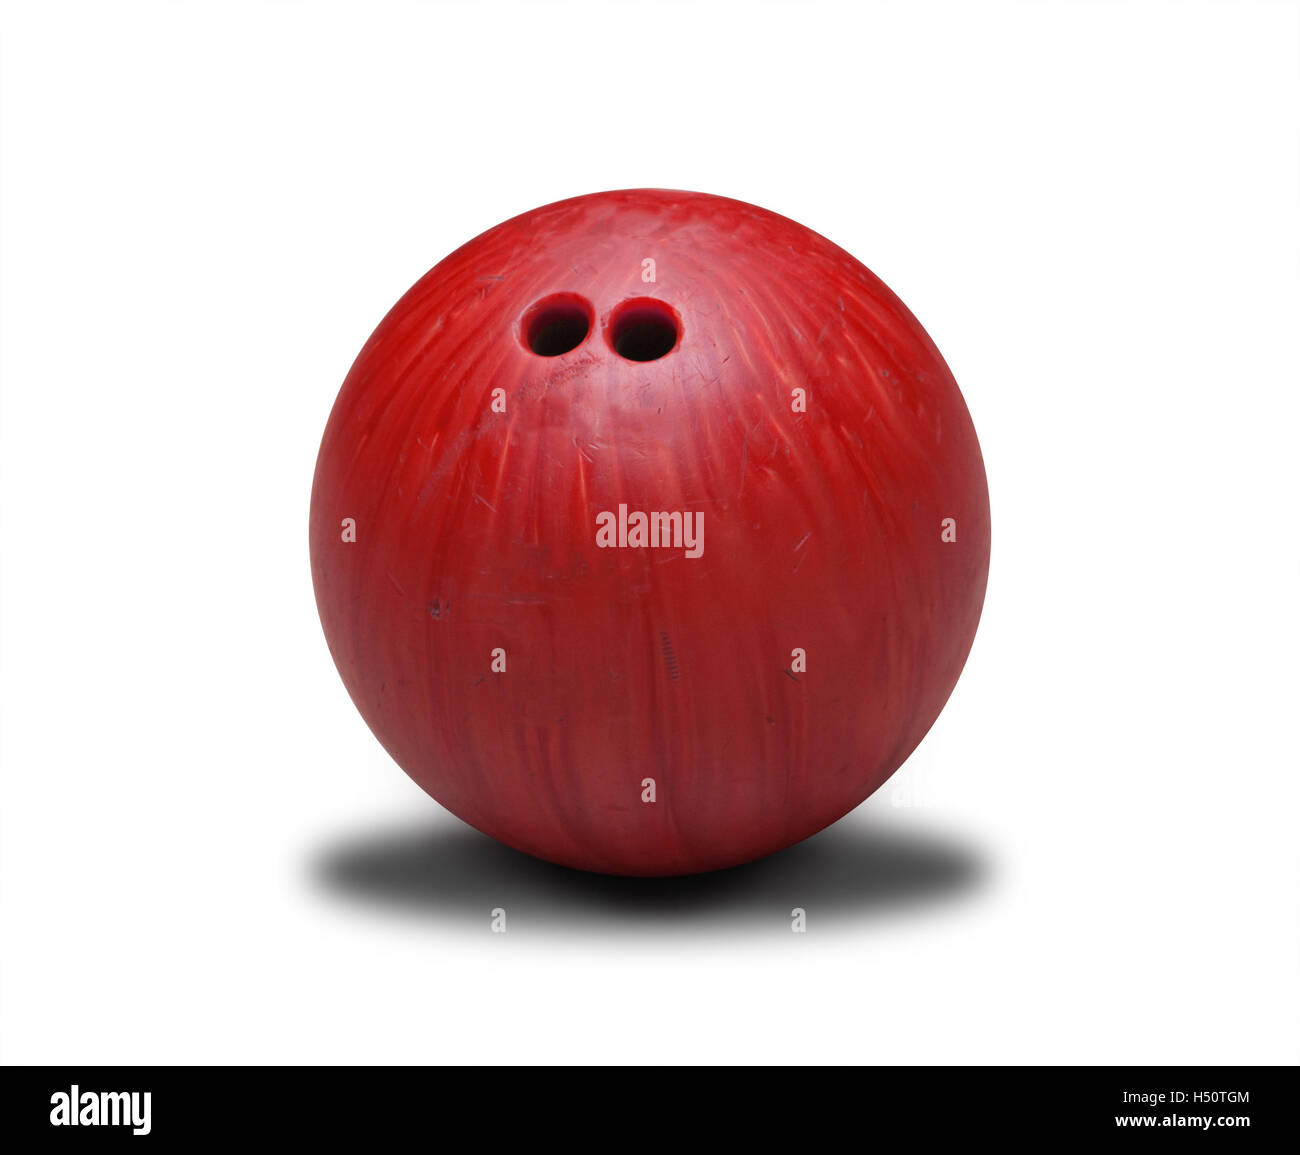 Red bowling ball isolated on white background. Stock Photo